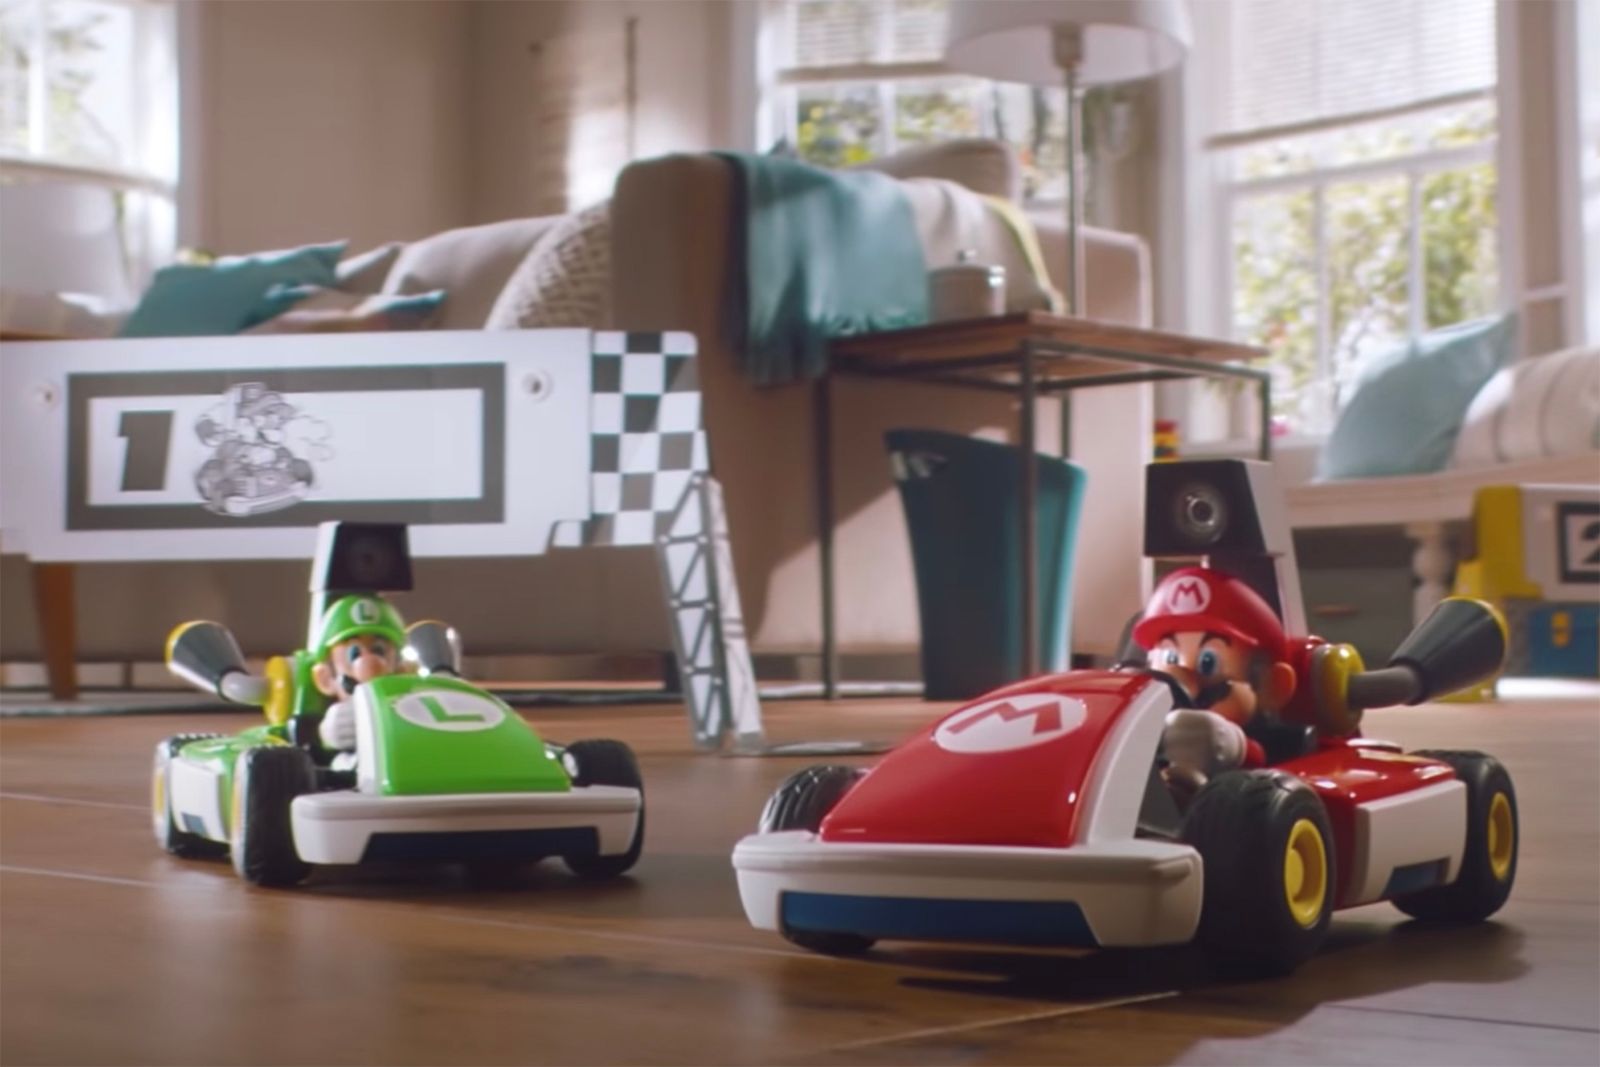 Mario Kart Live Home Circuit uses RC karts to bring Switch gaming into the real world photo 1